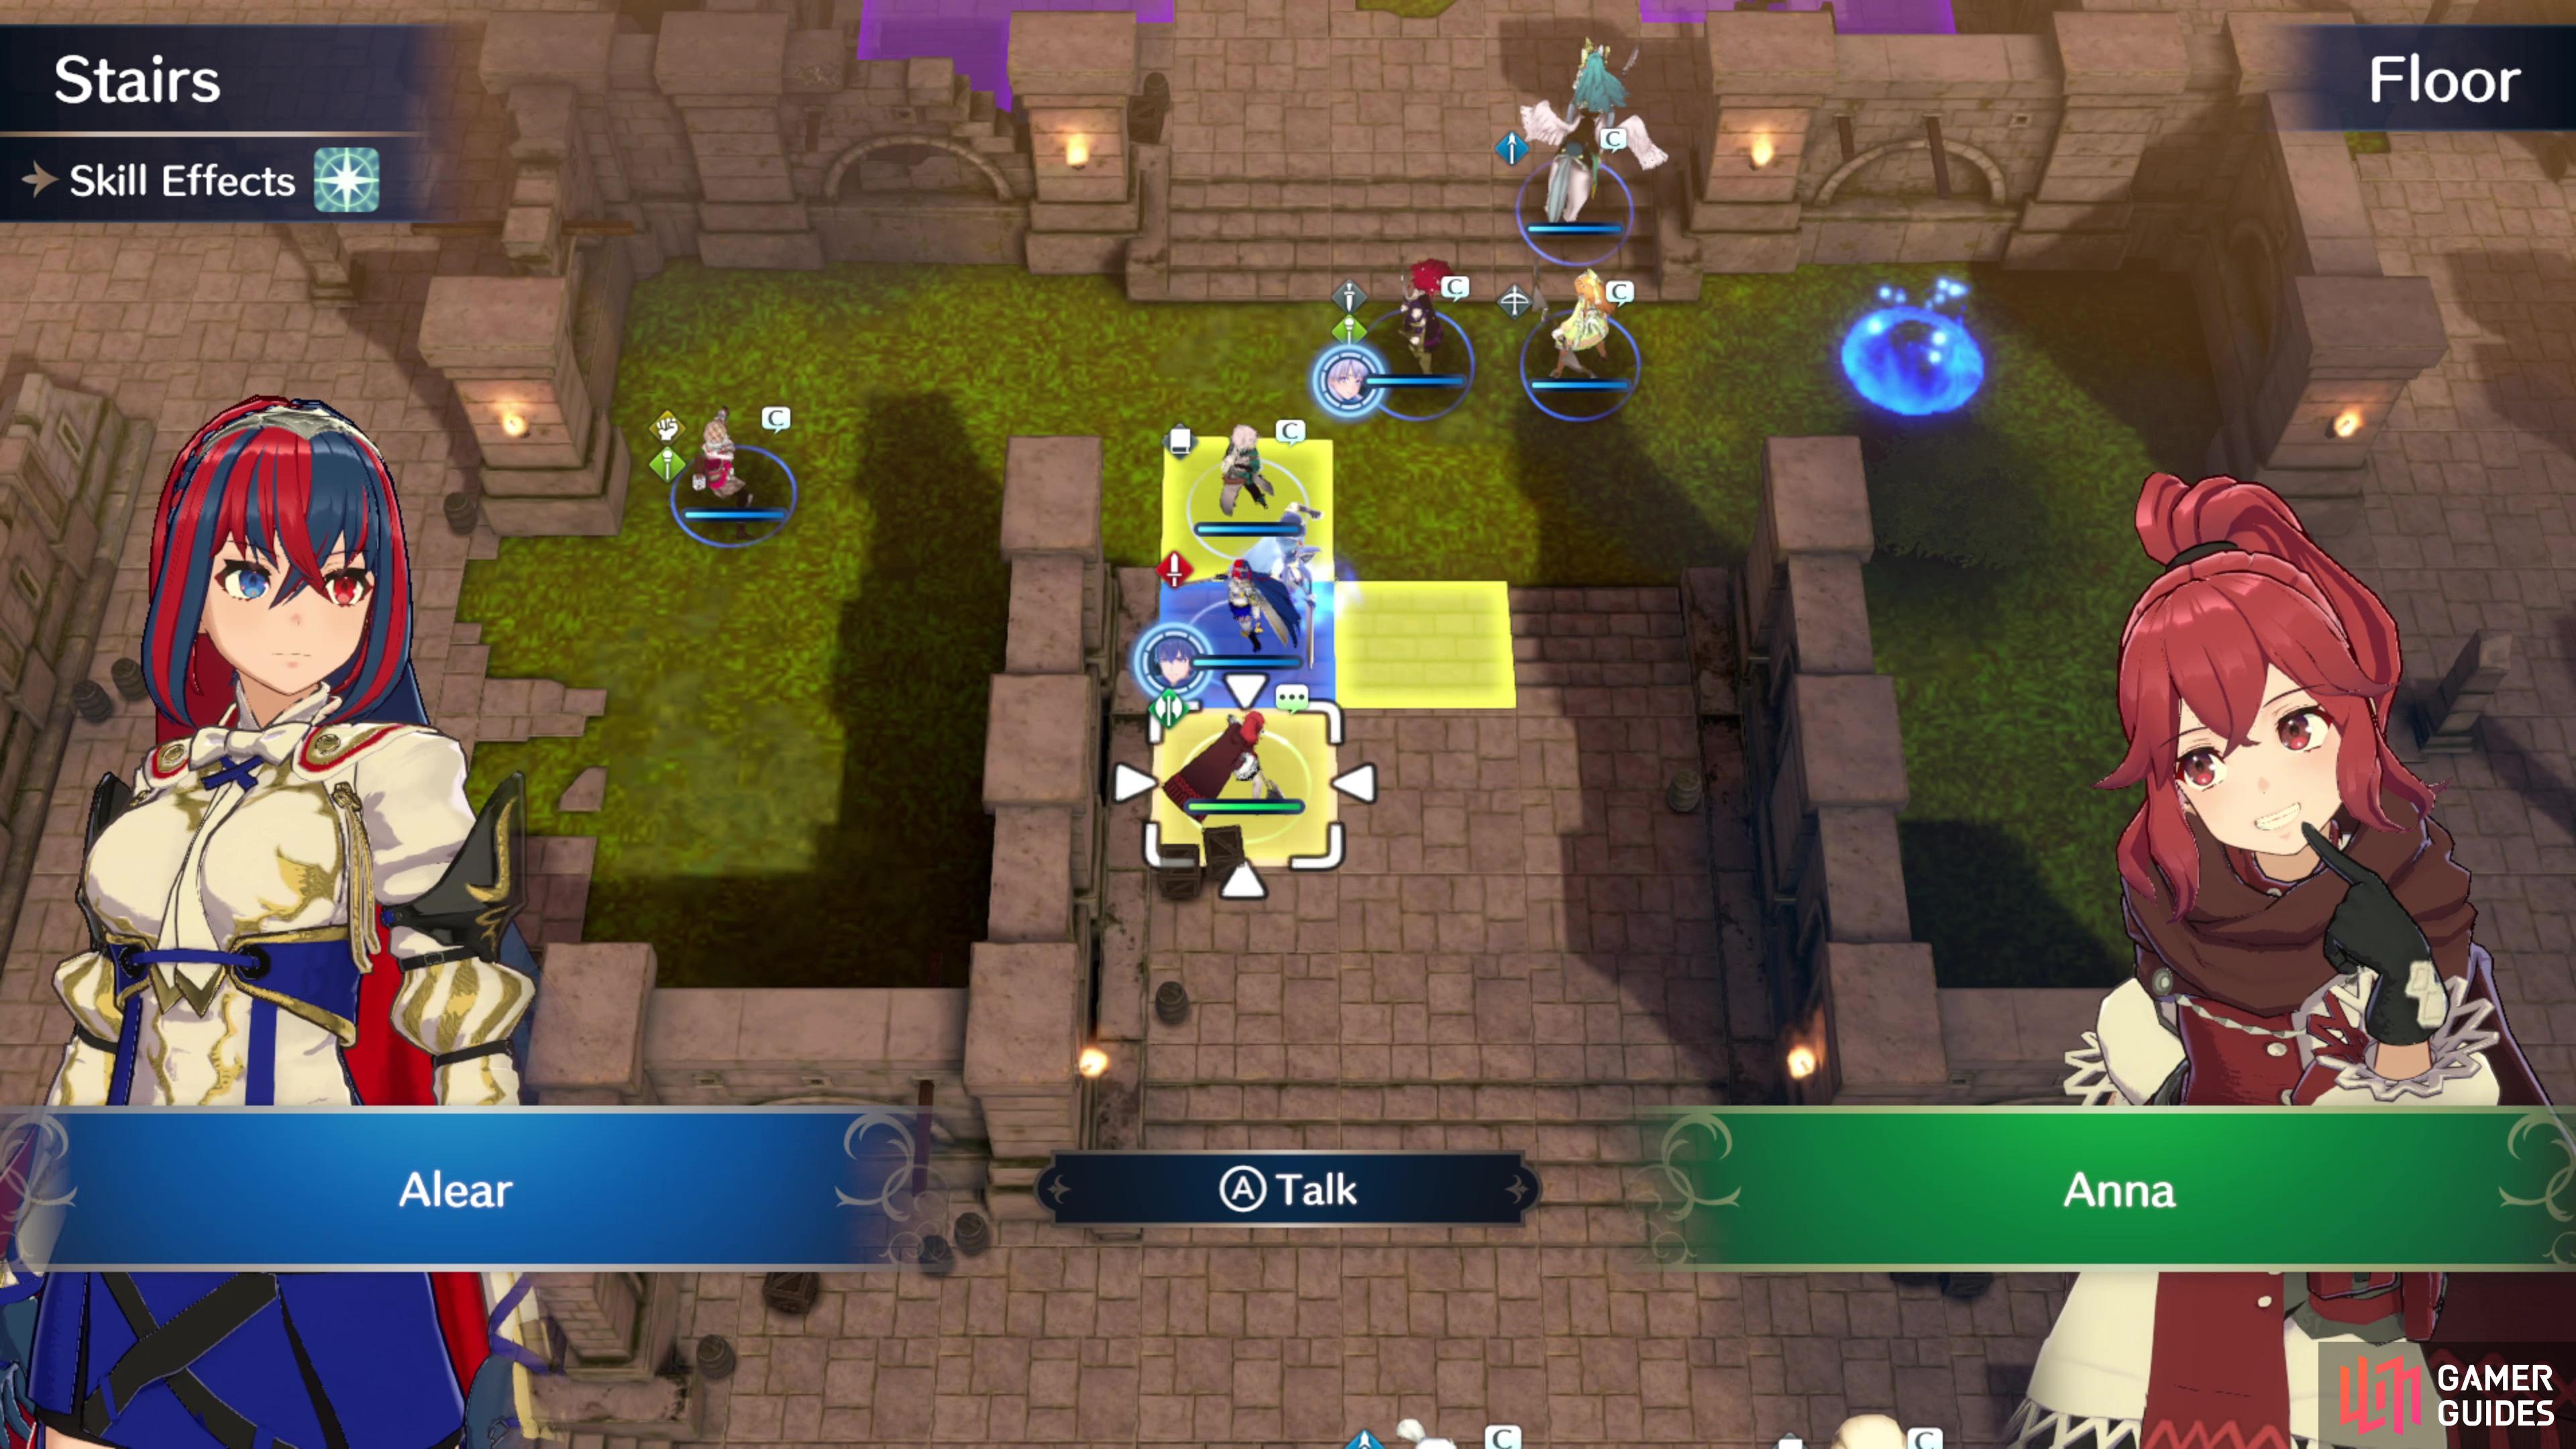 A few characters, however, you'll need to track down during battles and talk to them,